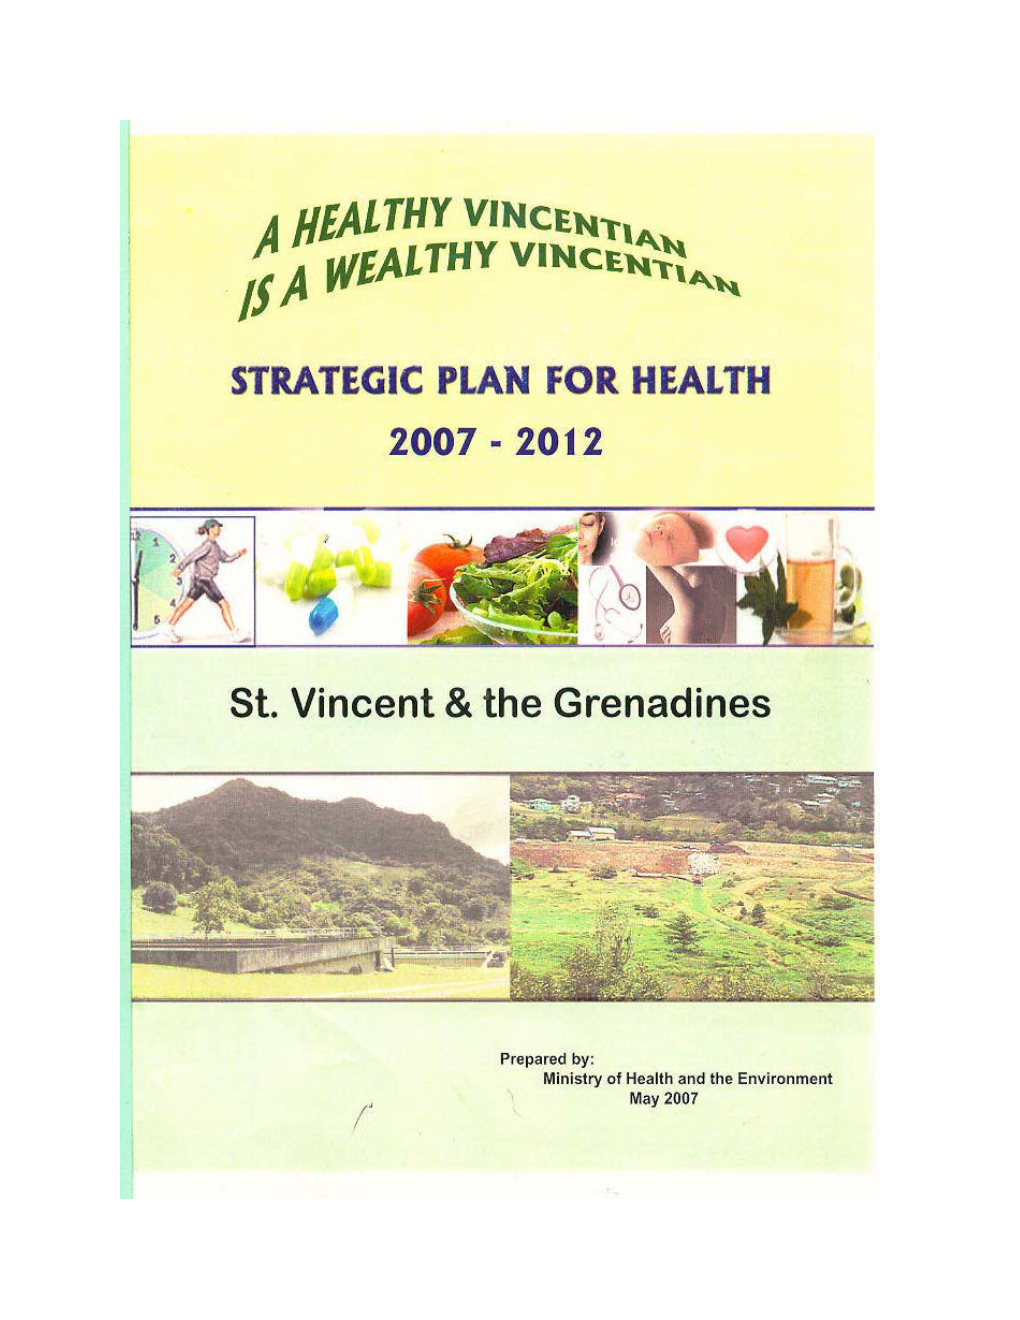 National Strategic Health Plan 2007-2012 Was Made Possible Through the Collective Efforts of Many Persons, Whose Contributions Are Most Appreciated